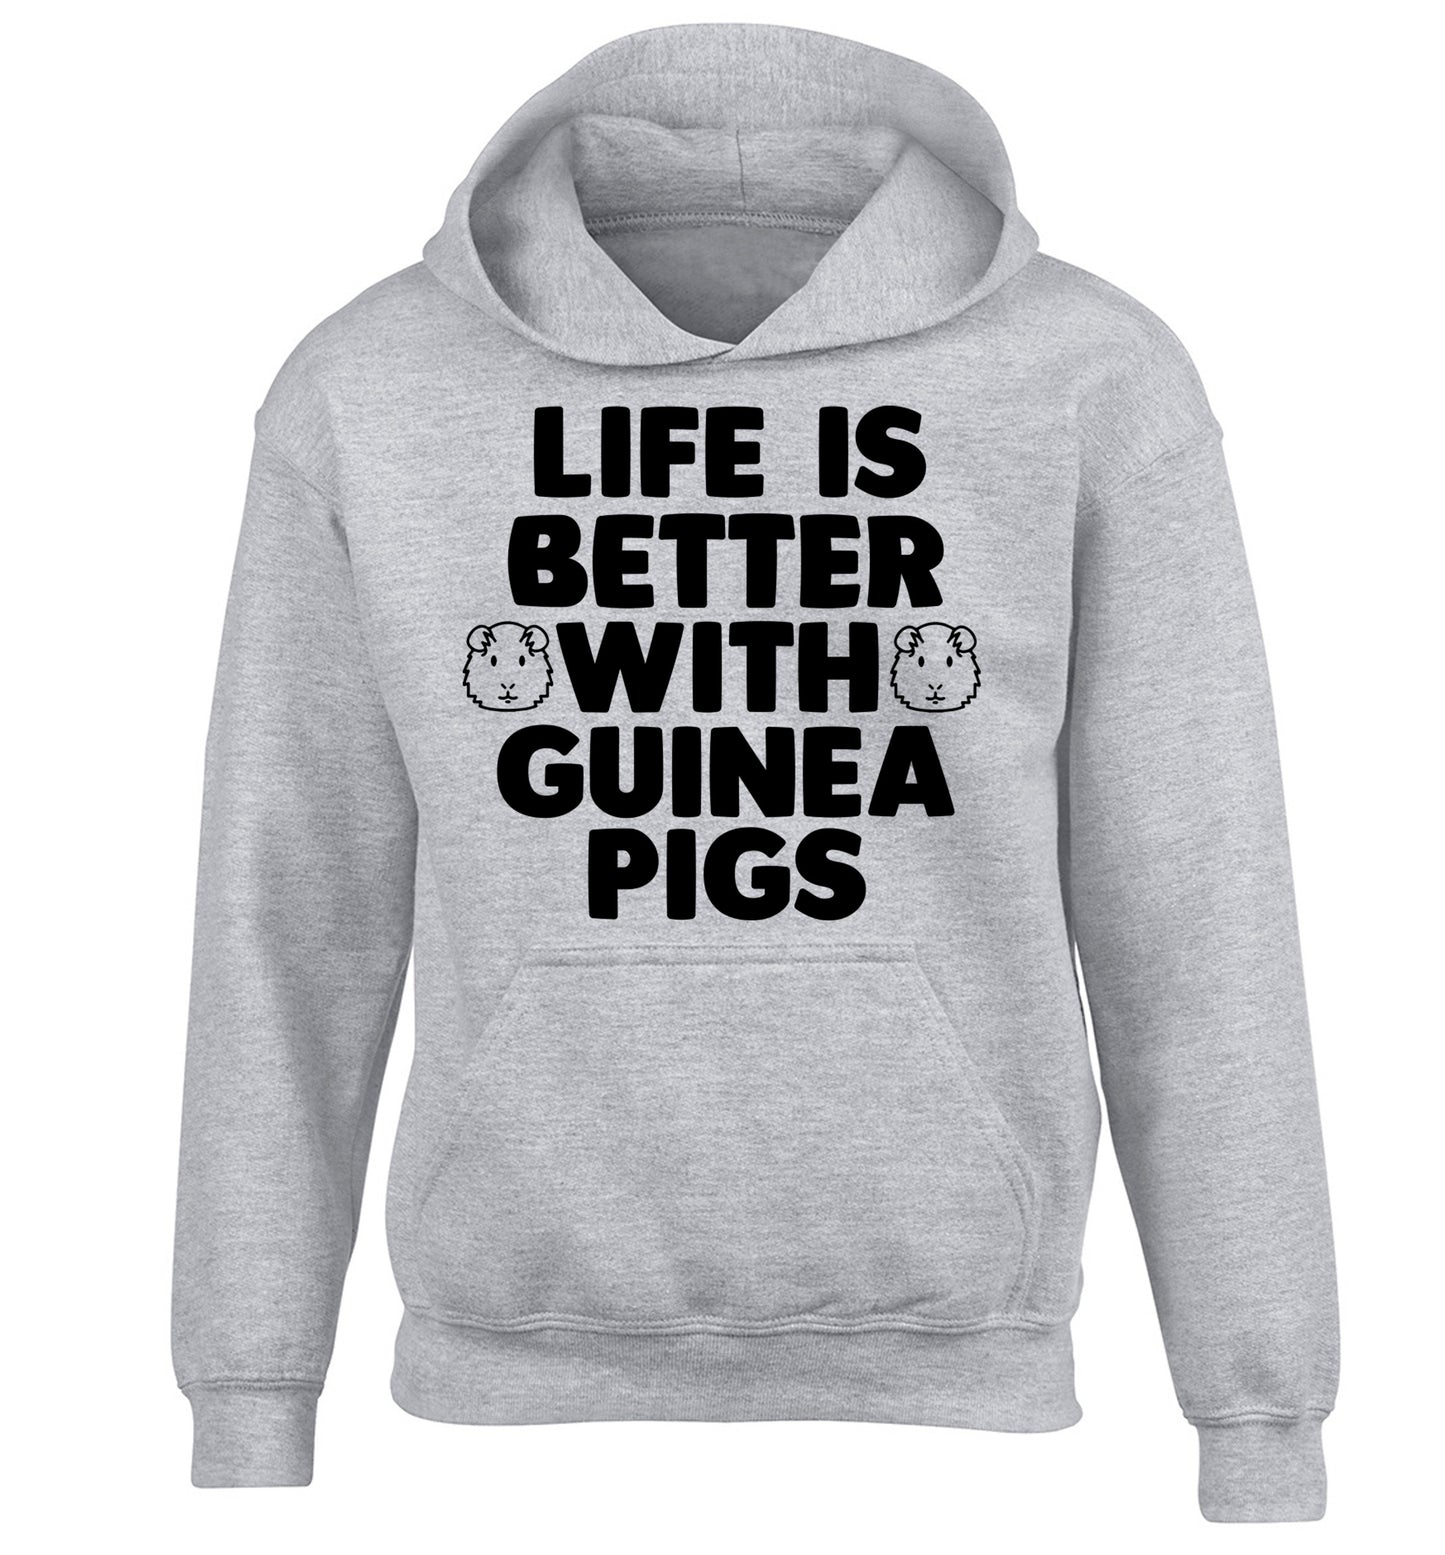 Life is better with guinea pigs children's grey hoodie 12-14 Years